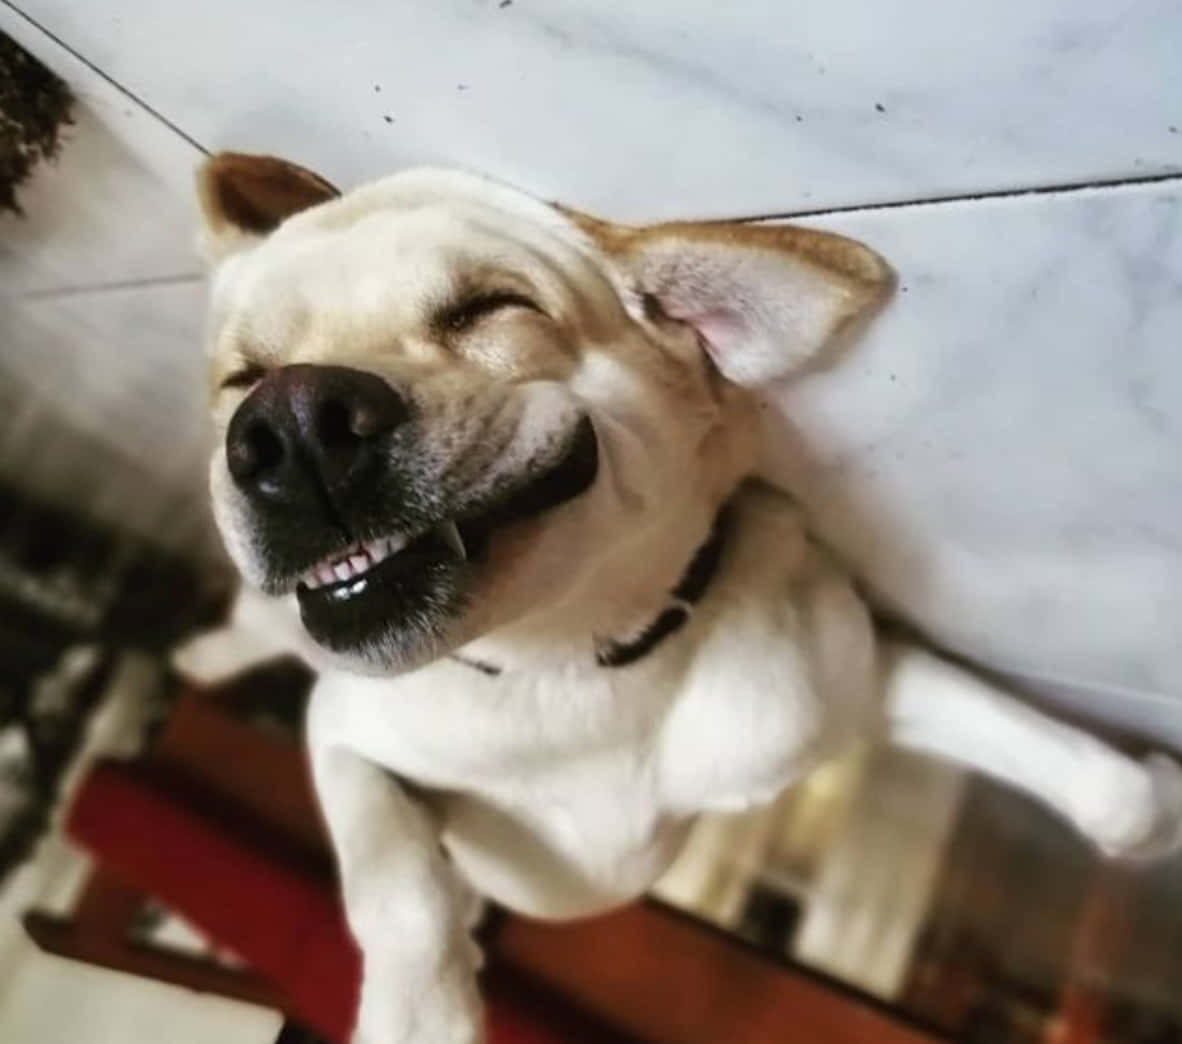 Enjoy this side-splitting laugh with a funny pet!